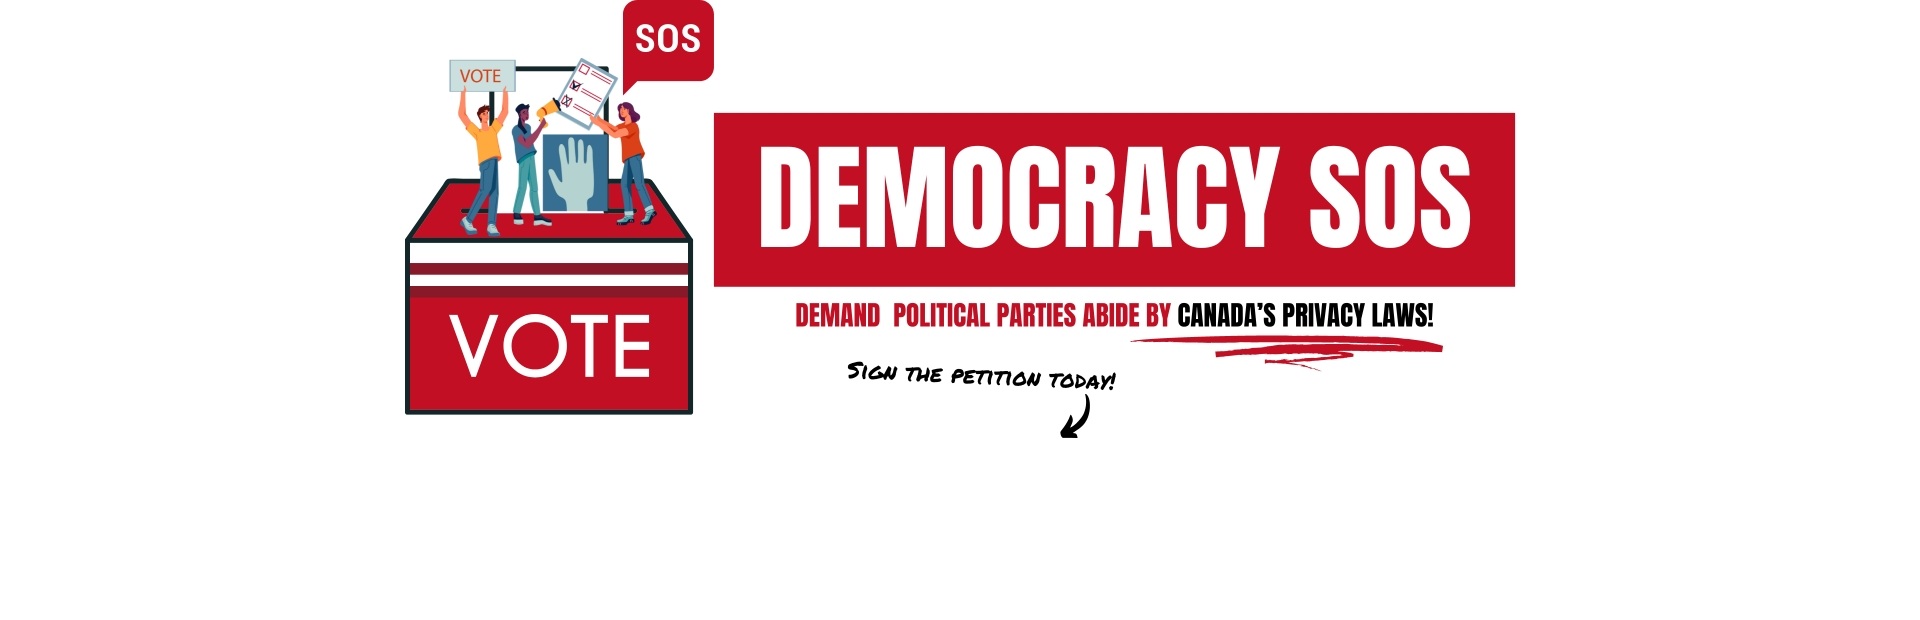 Democracy SOS! Make Political Parties Play by the Rules